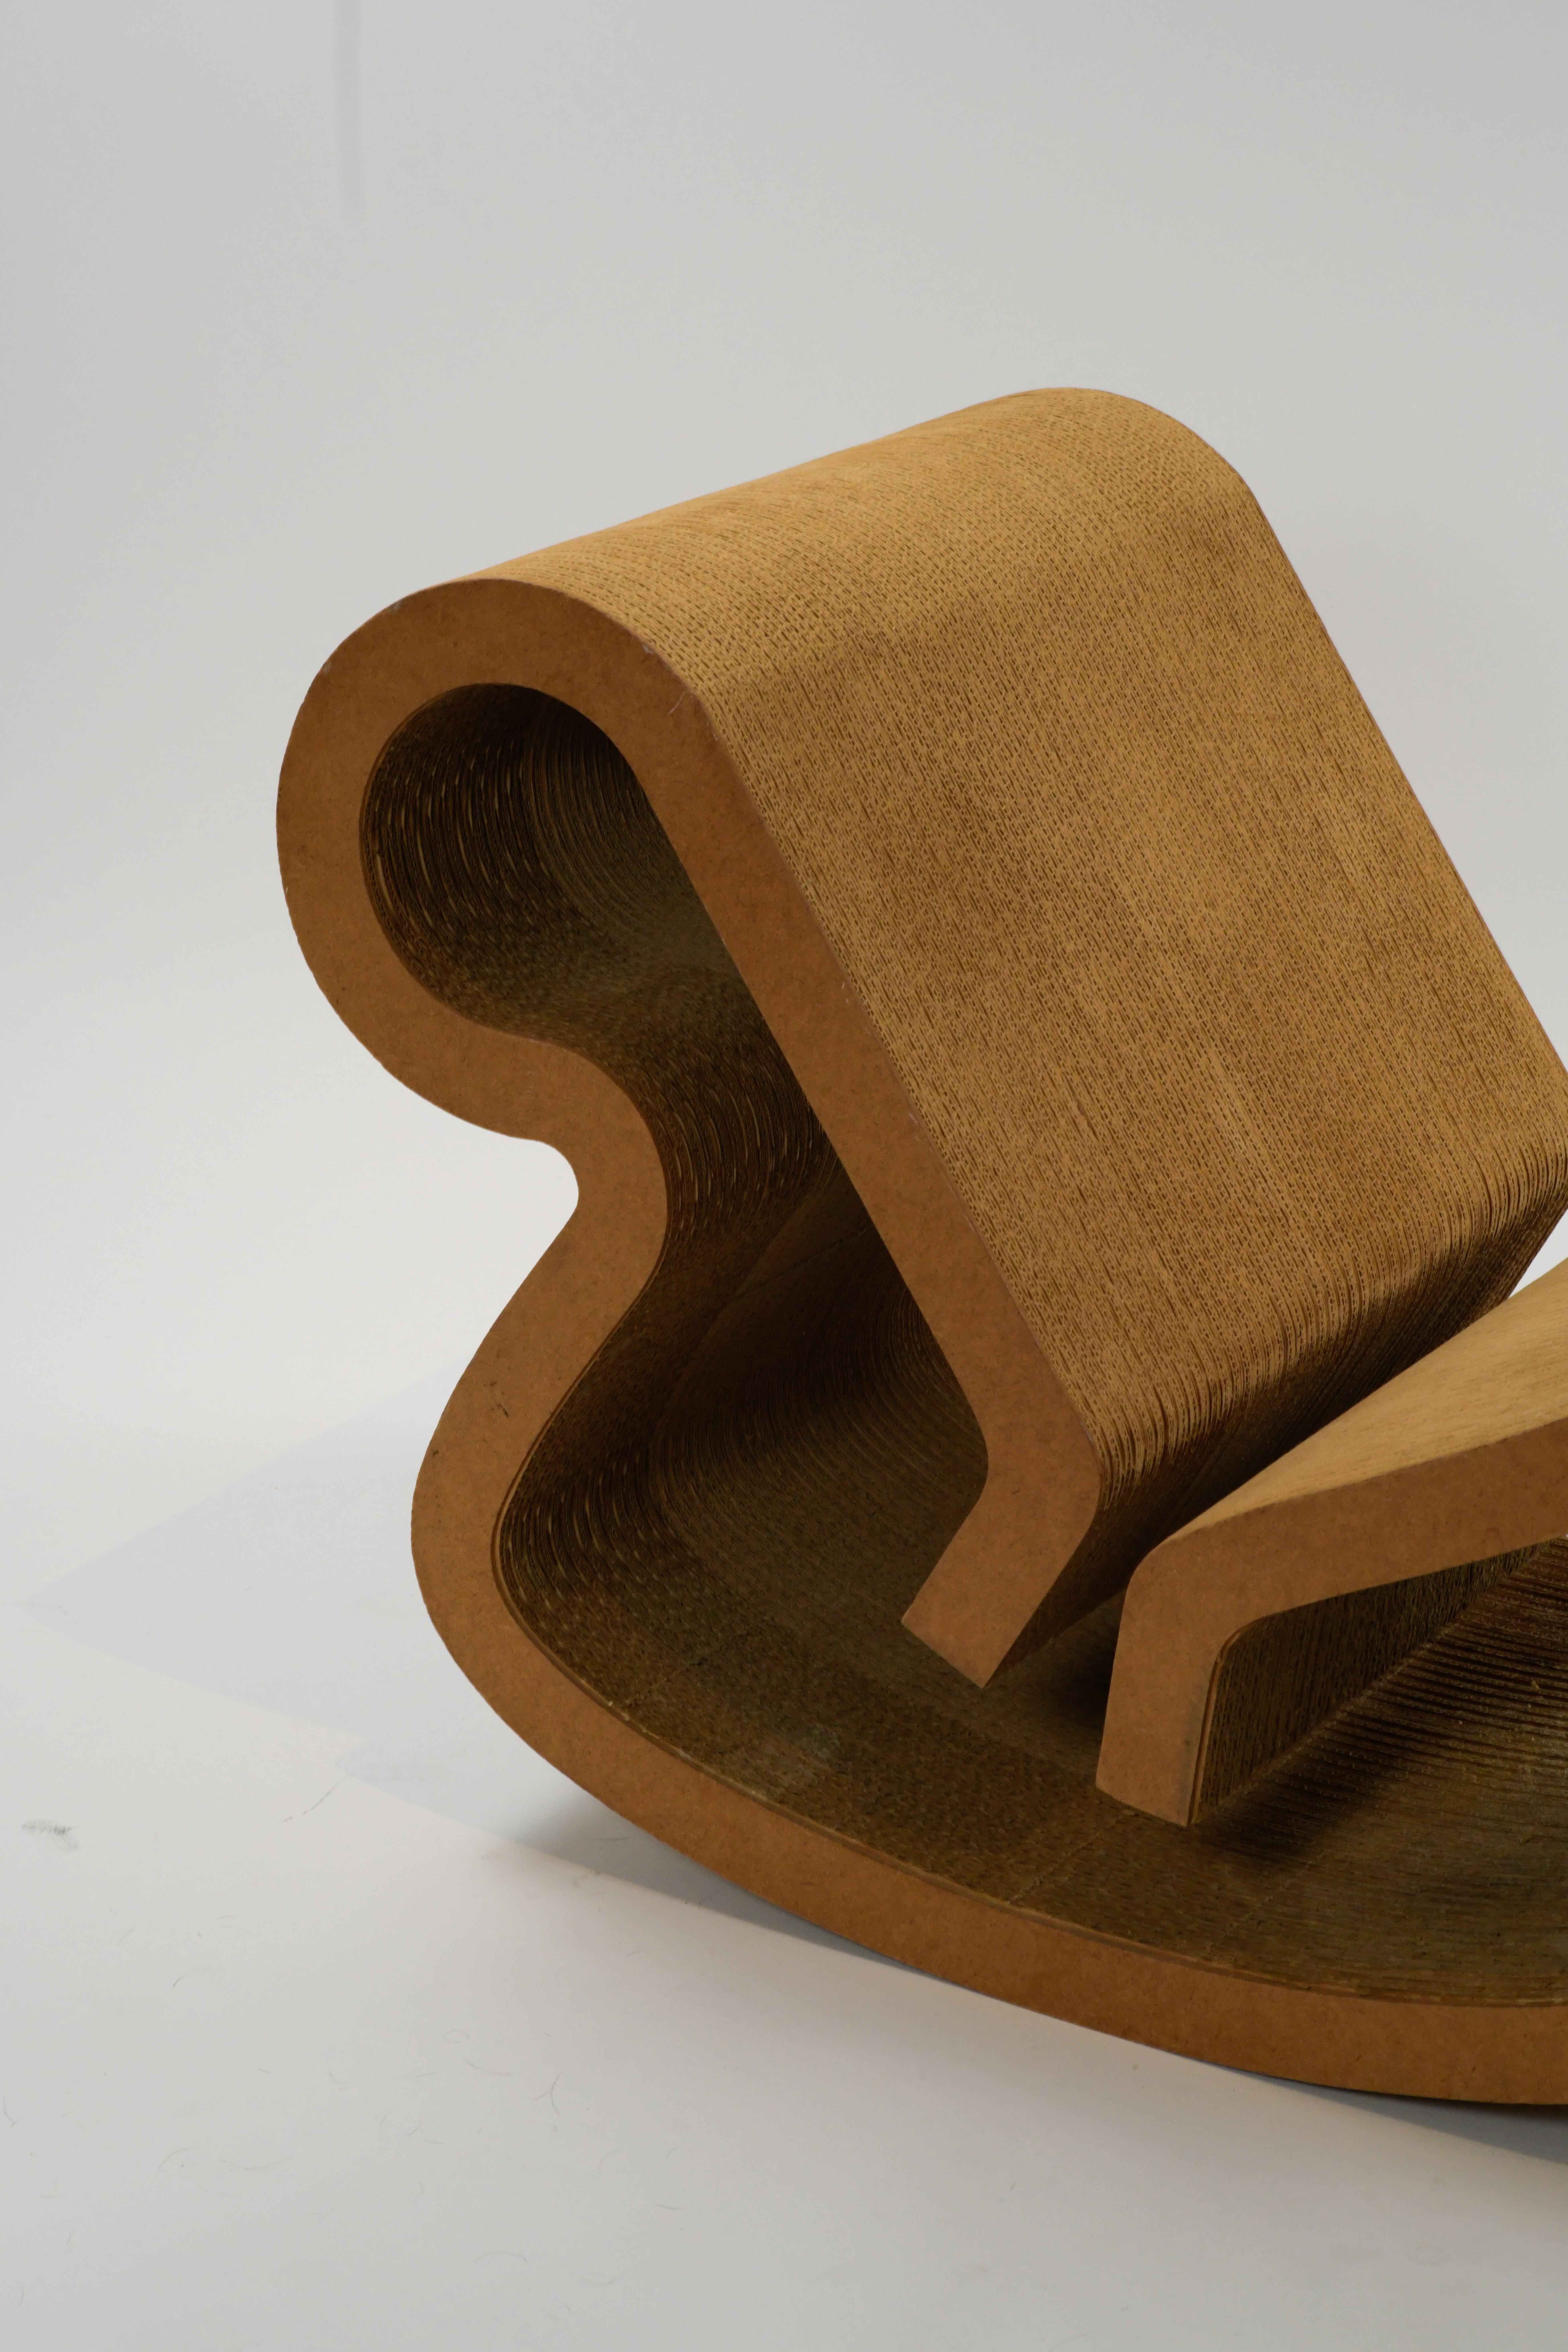 Iconic 1970s 'Contour' rocking lounge chair by the famous architect Frank Gehry for Easy Edges, Inc. This gorgeous patinated lounge chair is made from laminated corrugated cardboard & masonite and is in great vintage condition considering its age. A